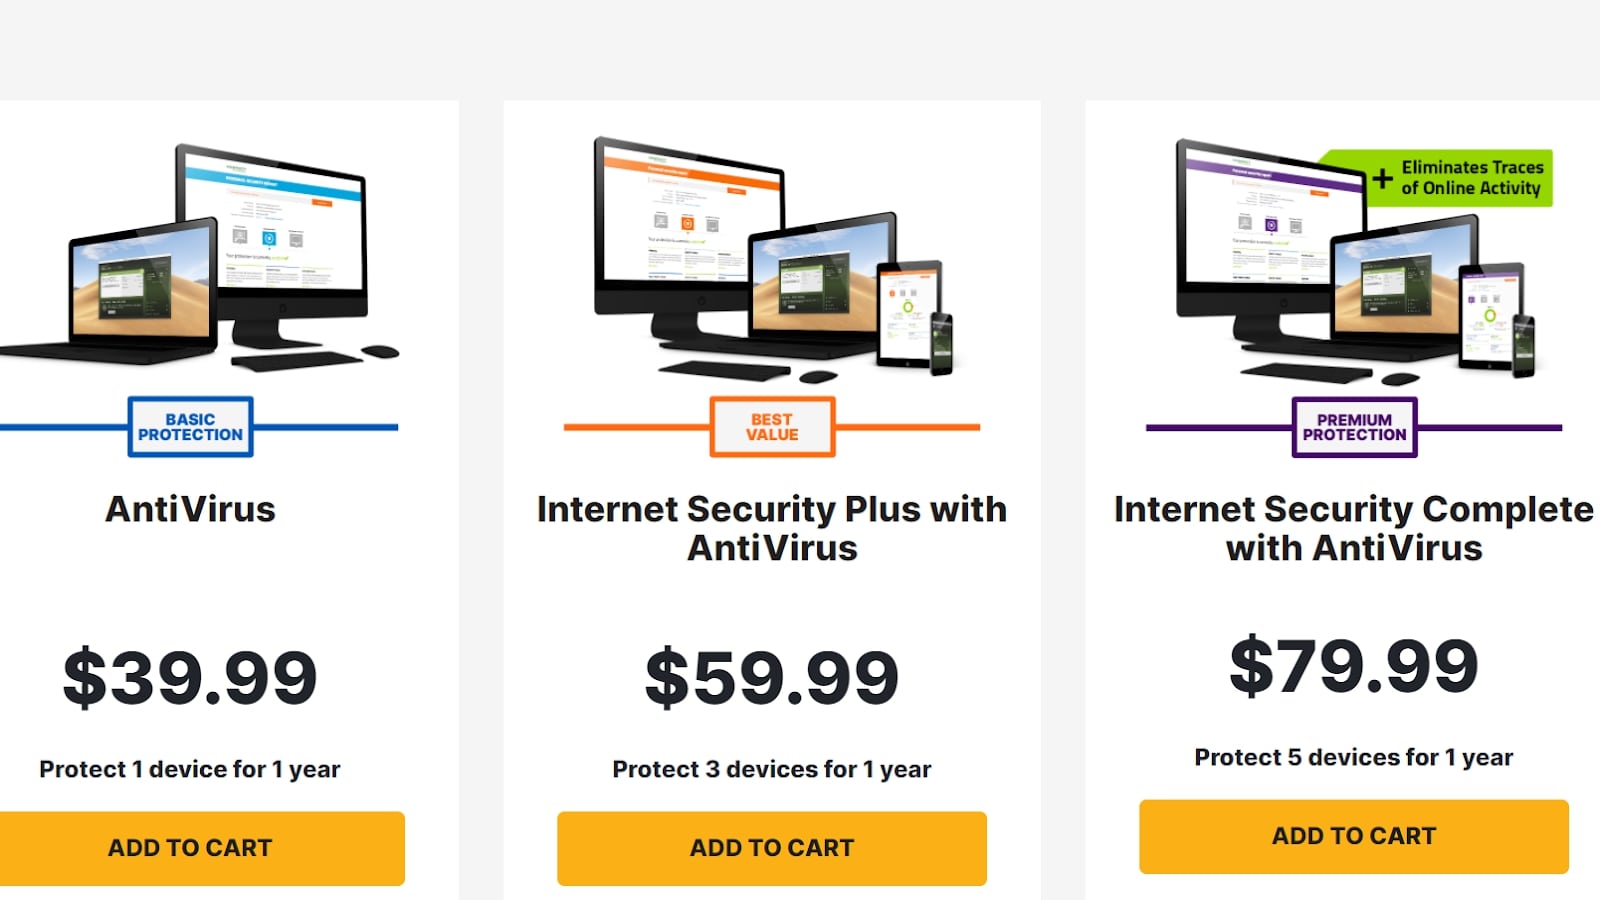 webroot internet security complete 2018 review